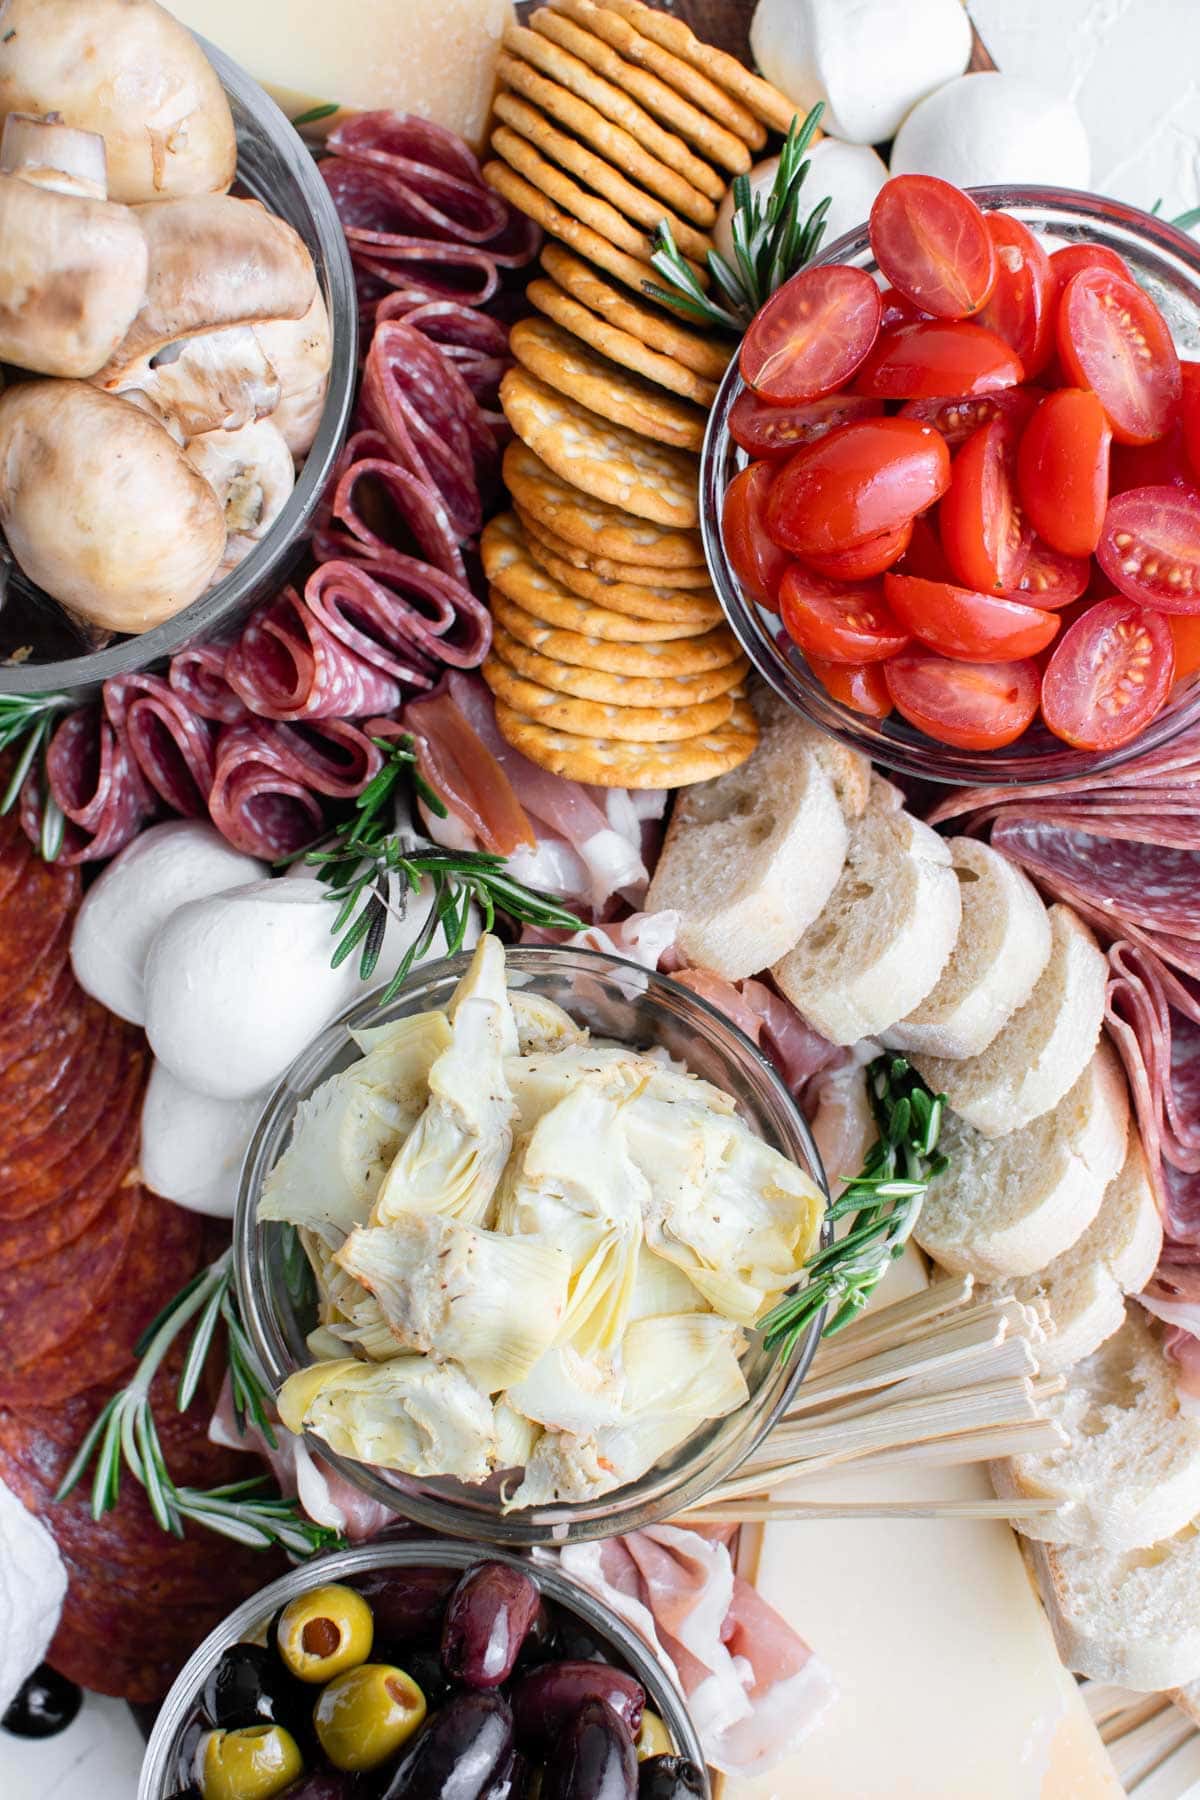 antipasto platter with meat, cheese, crackers, tomatoes, mushrooms, olives, artichokes